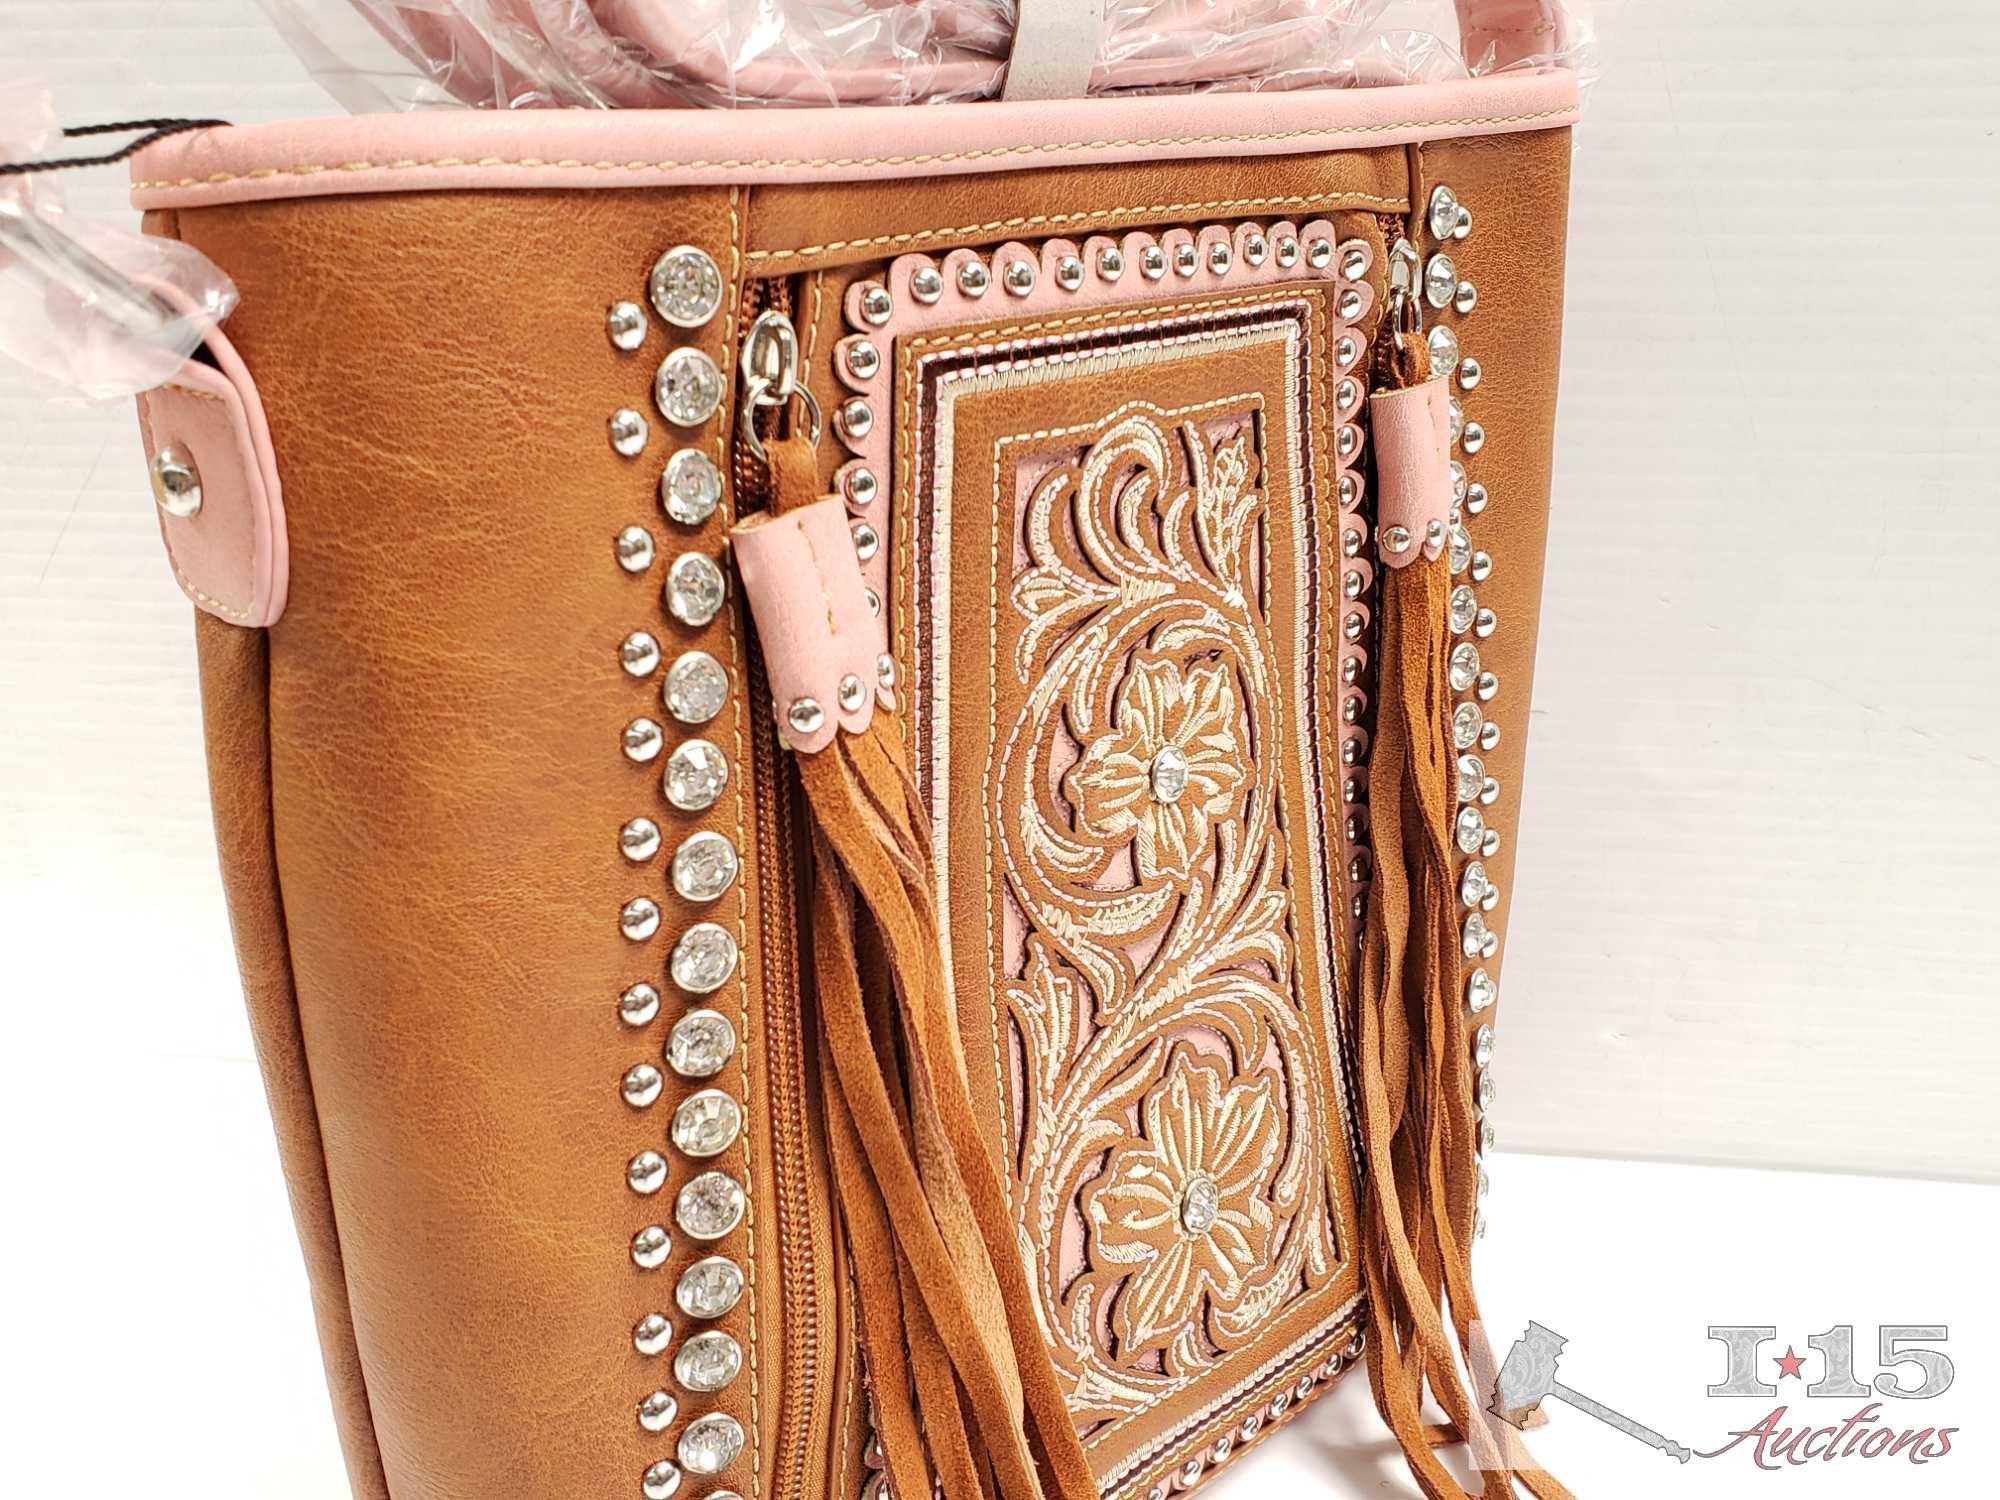 Montana West ... Floral tooled cross body purse with crystal rhinestones, silver studs, and fringe z